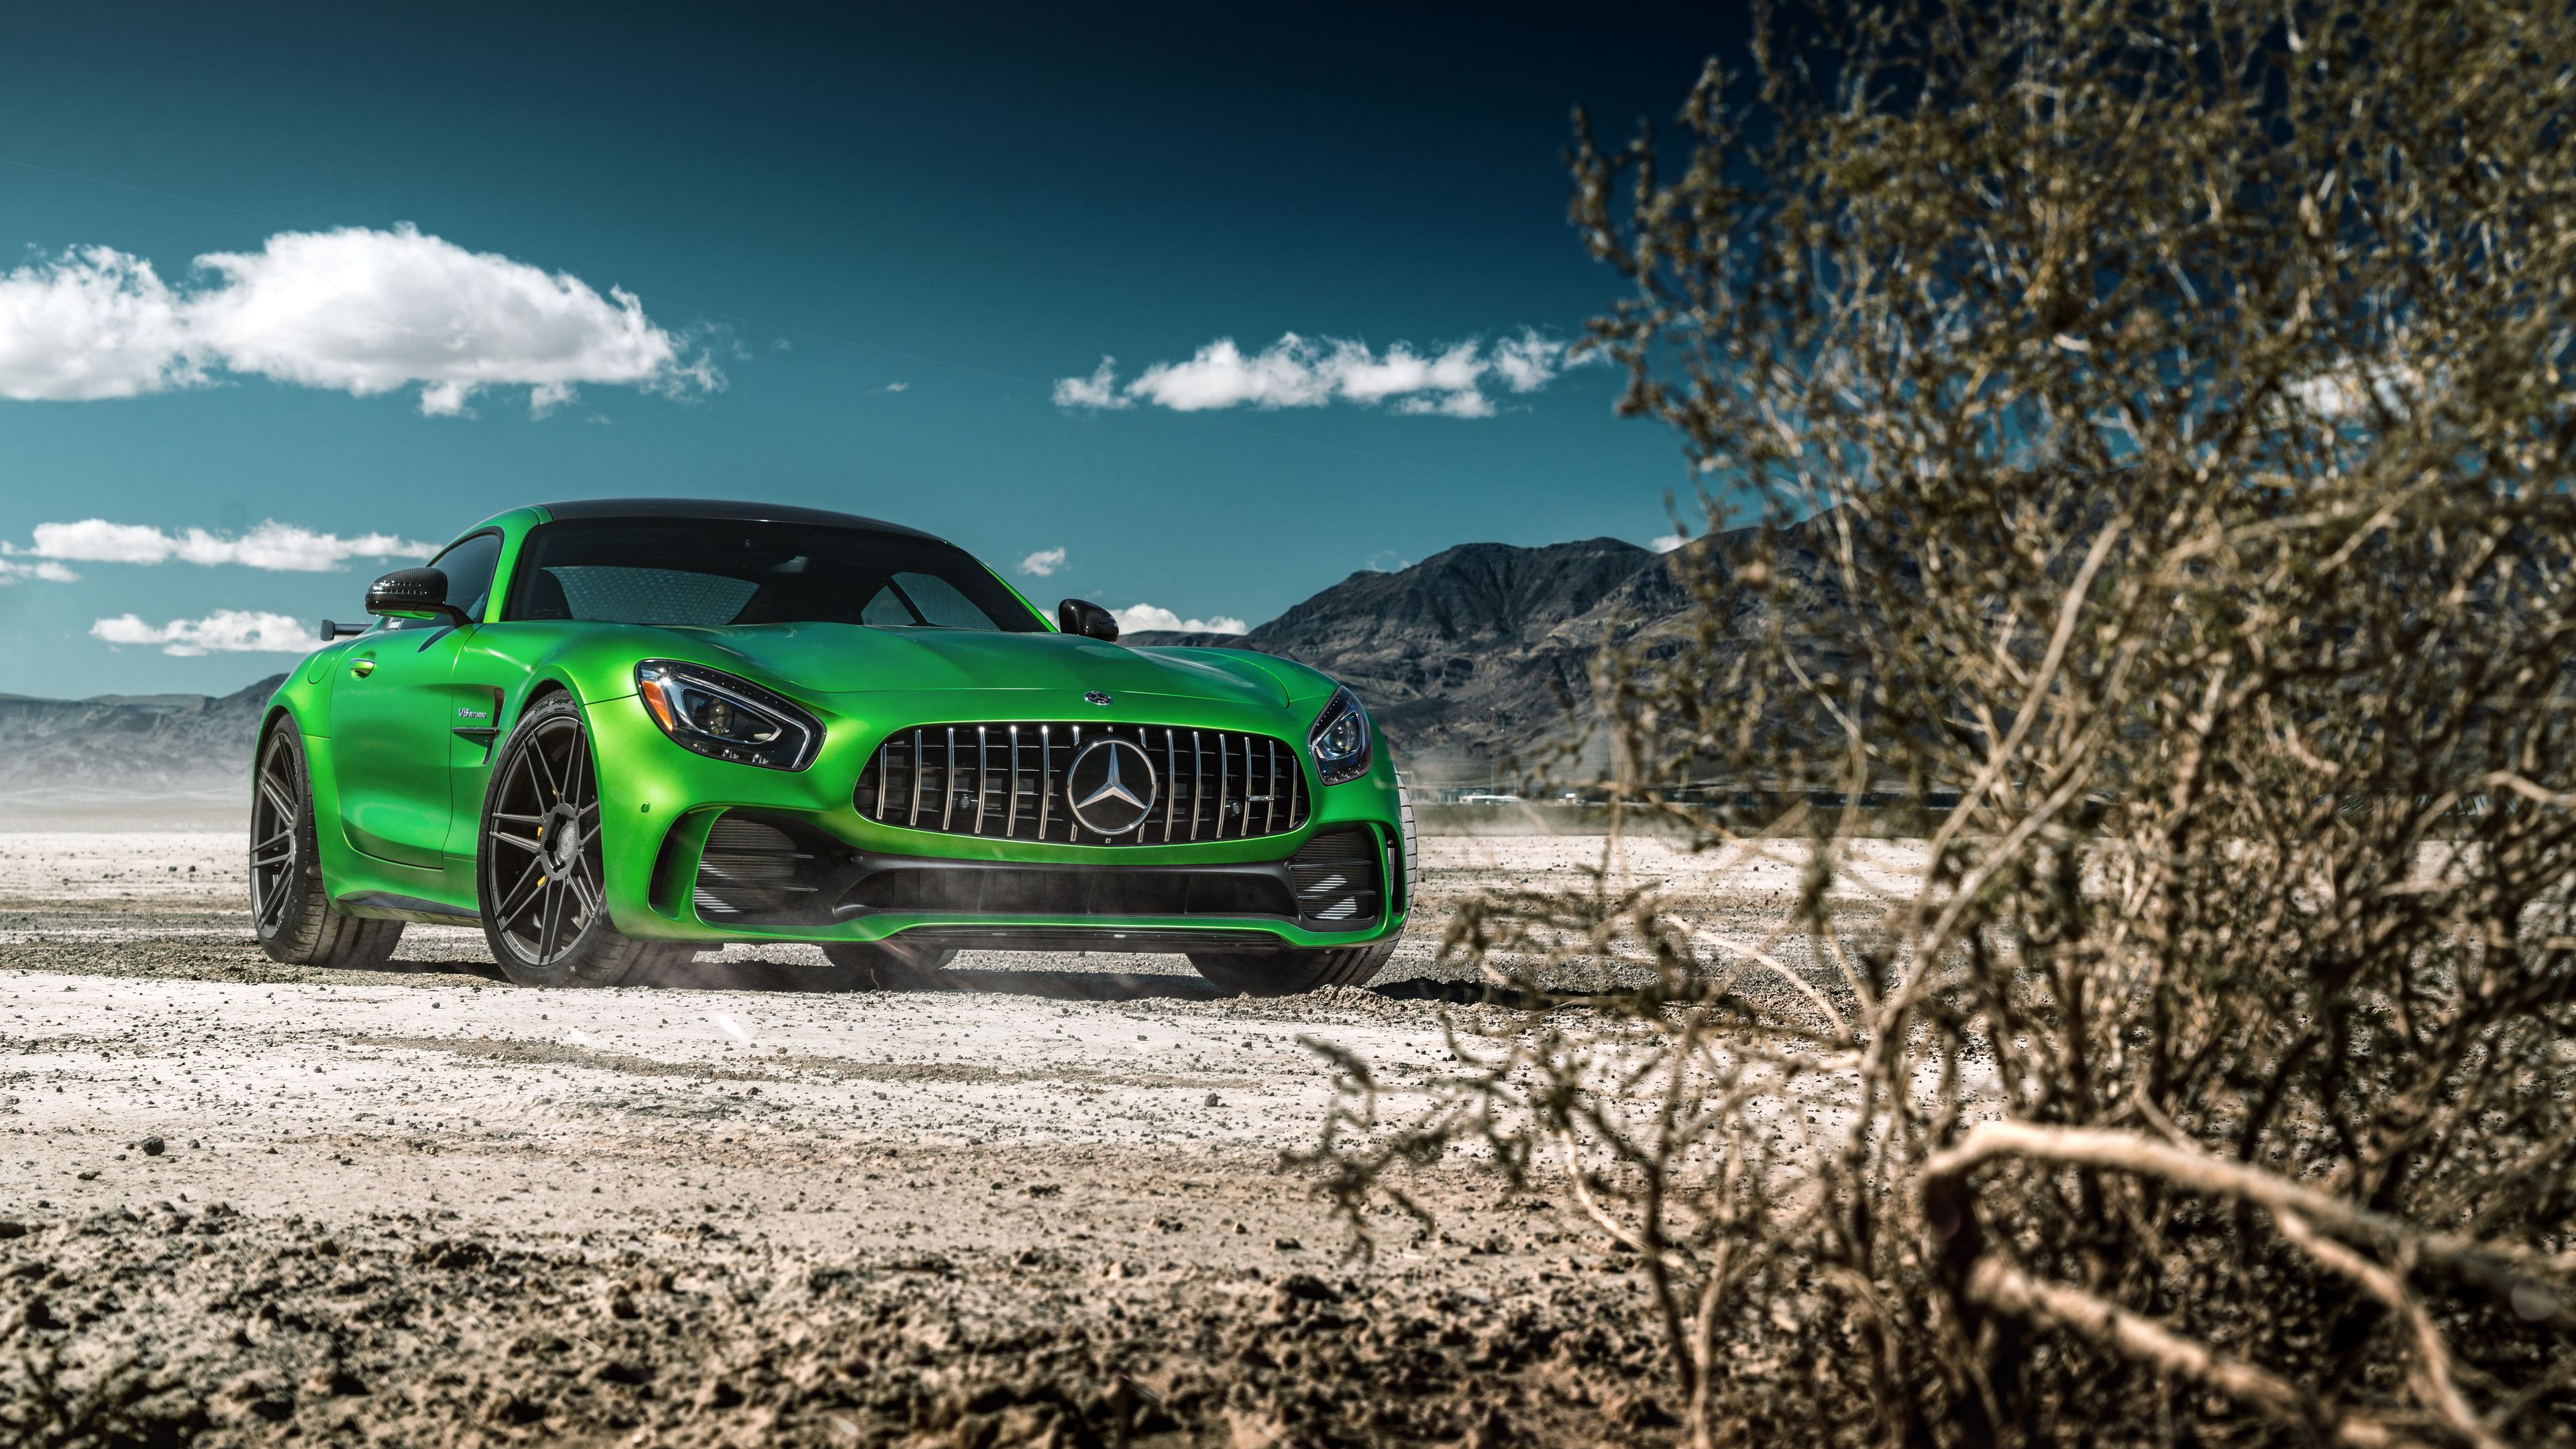 Mercedes-Amg Gt R Wallpapers